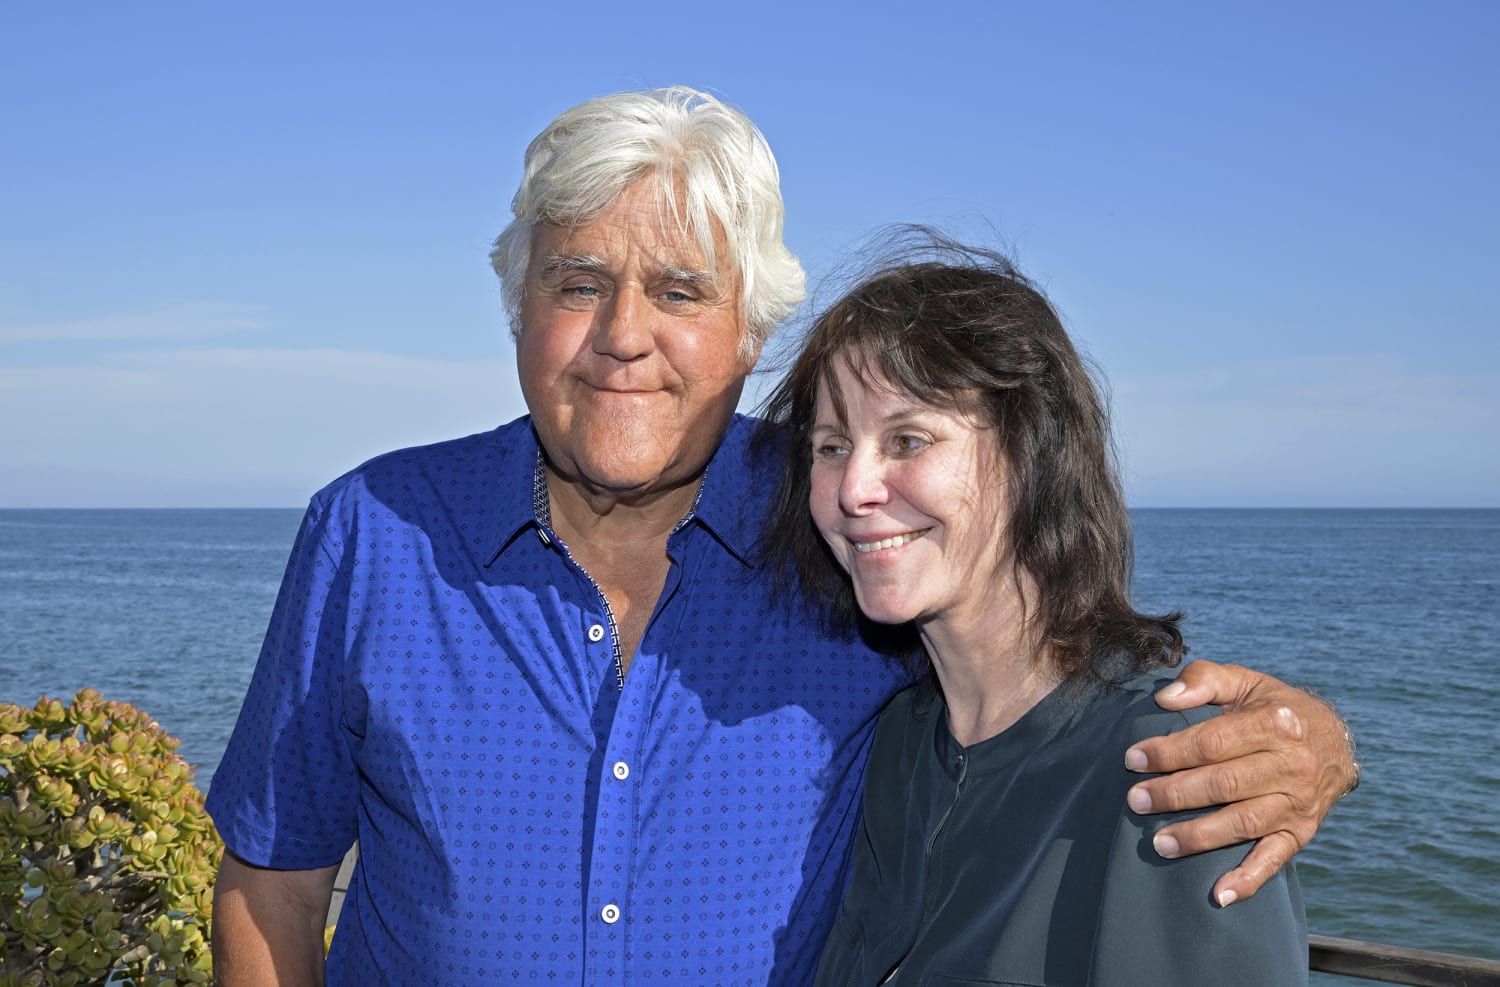 Jay Leno was granted custody of his wife's estate after she was diagnosed with dementia